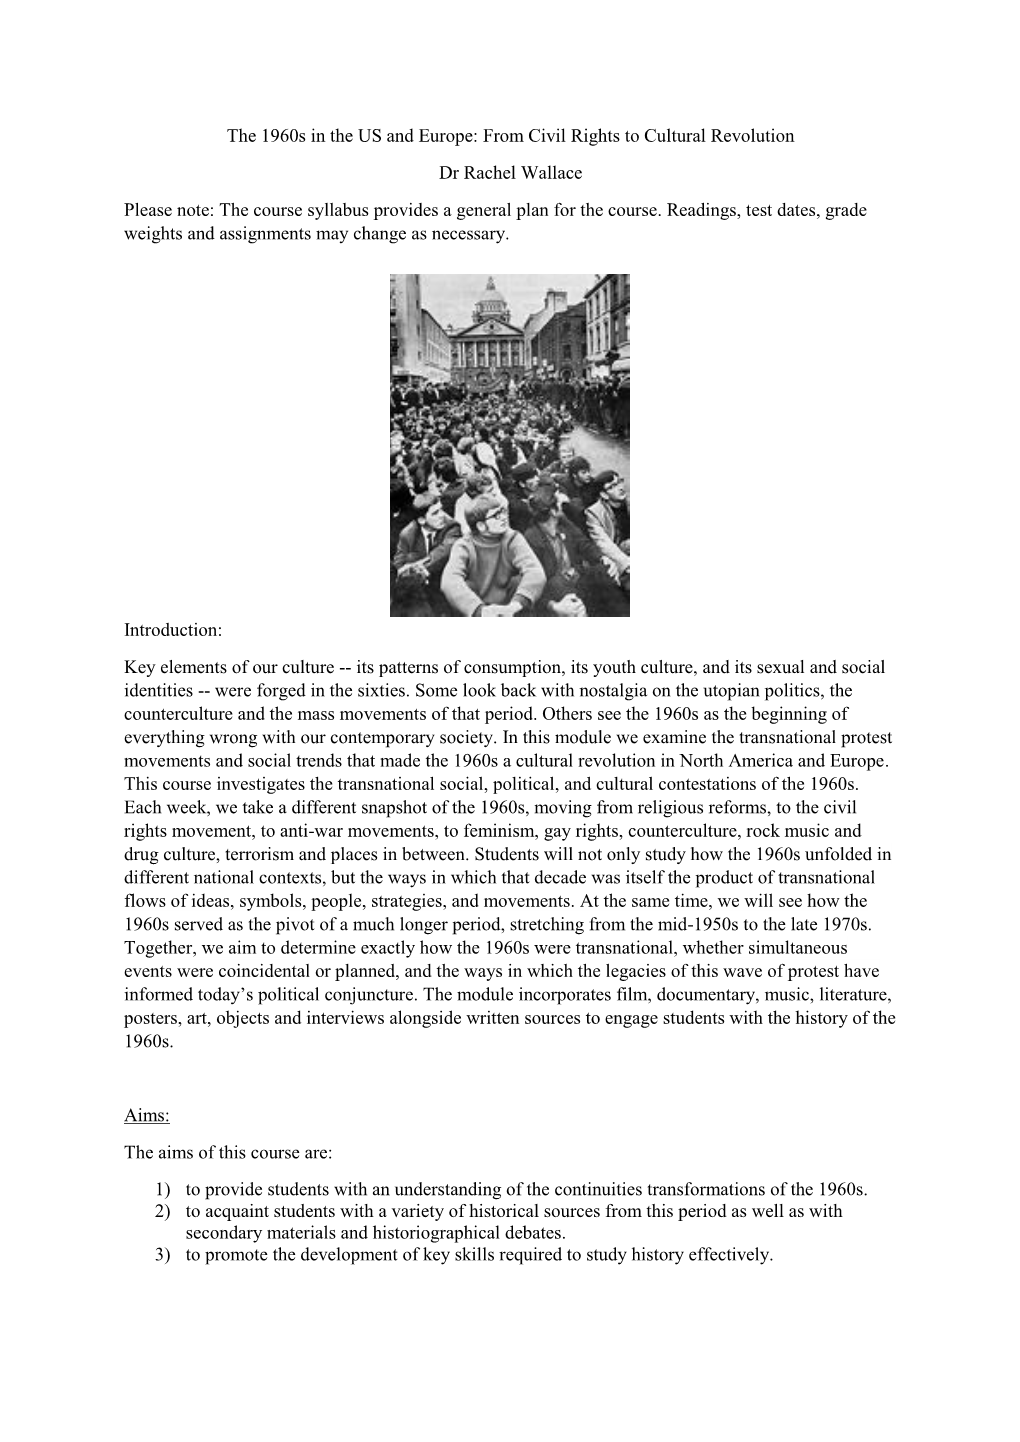 The 1960S in the US and Europe: from Civil Rights to Cultural Revolution Dr Rachel Wallace Please Note: the Course Syllabus Provides a General Plan for the Course